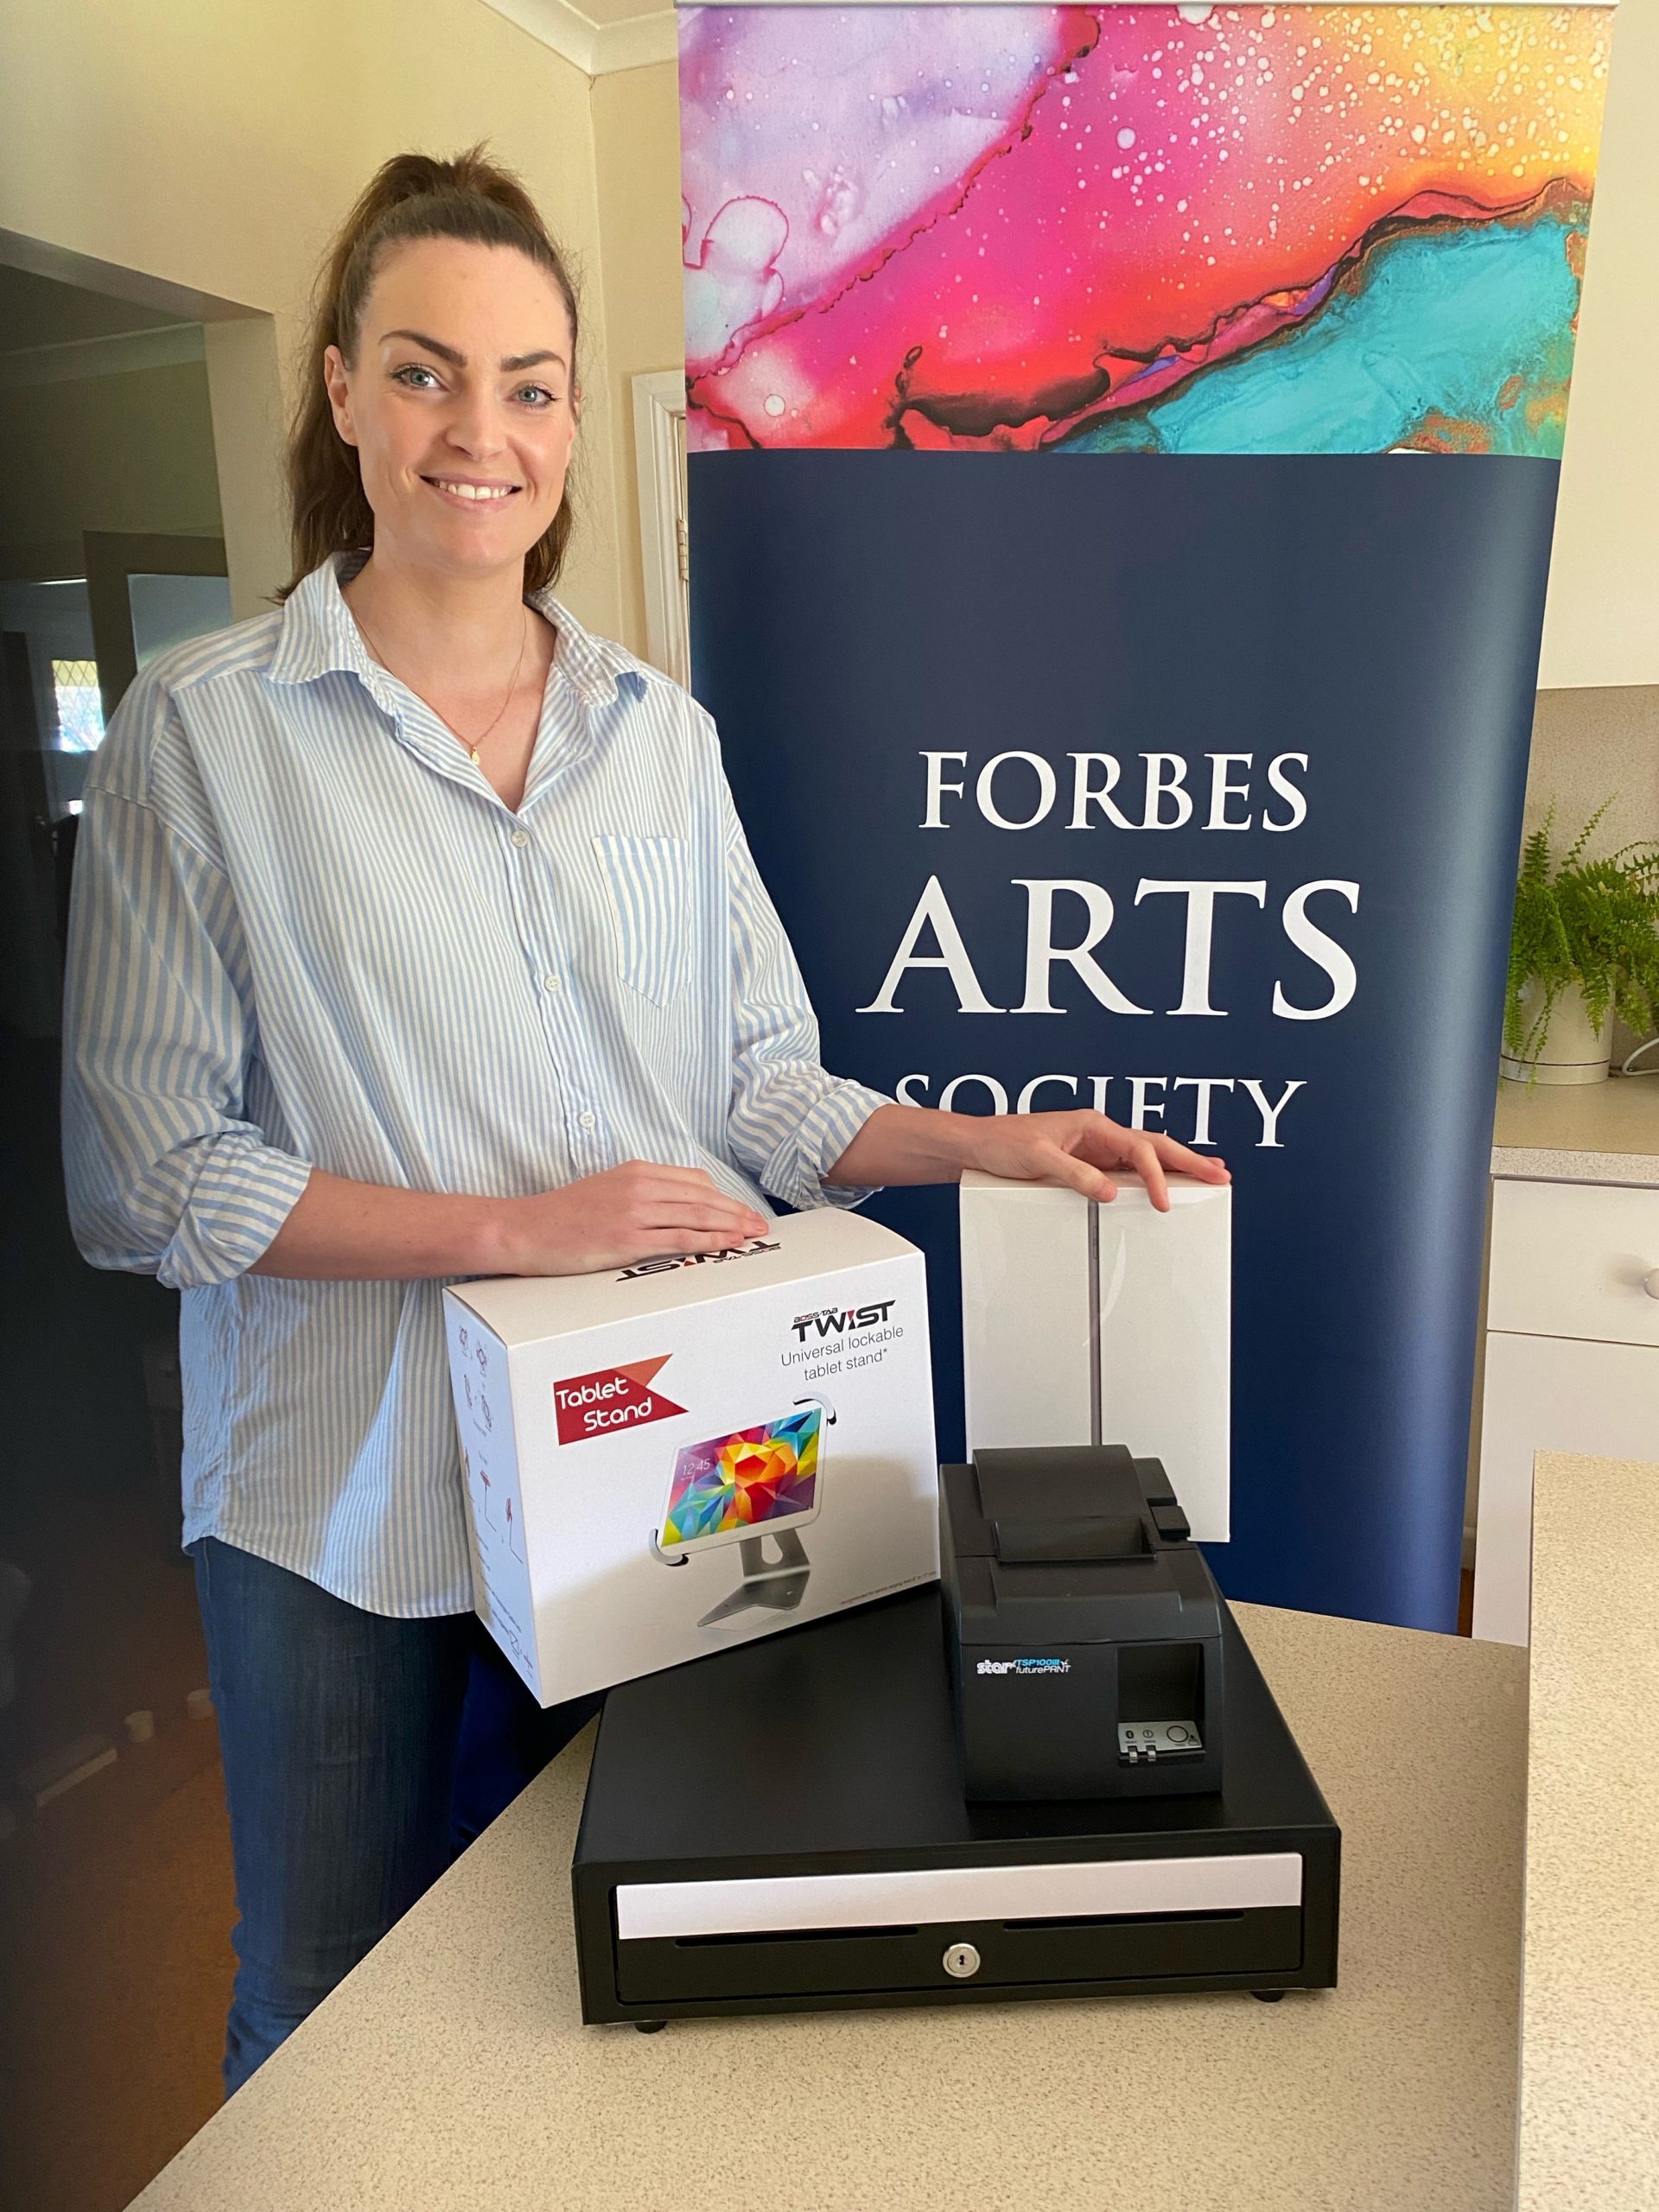 Smiling woman standing in front of "Forbes Arts Society" banner with new point-of-sale equipment on display